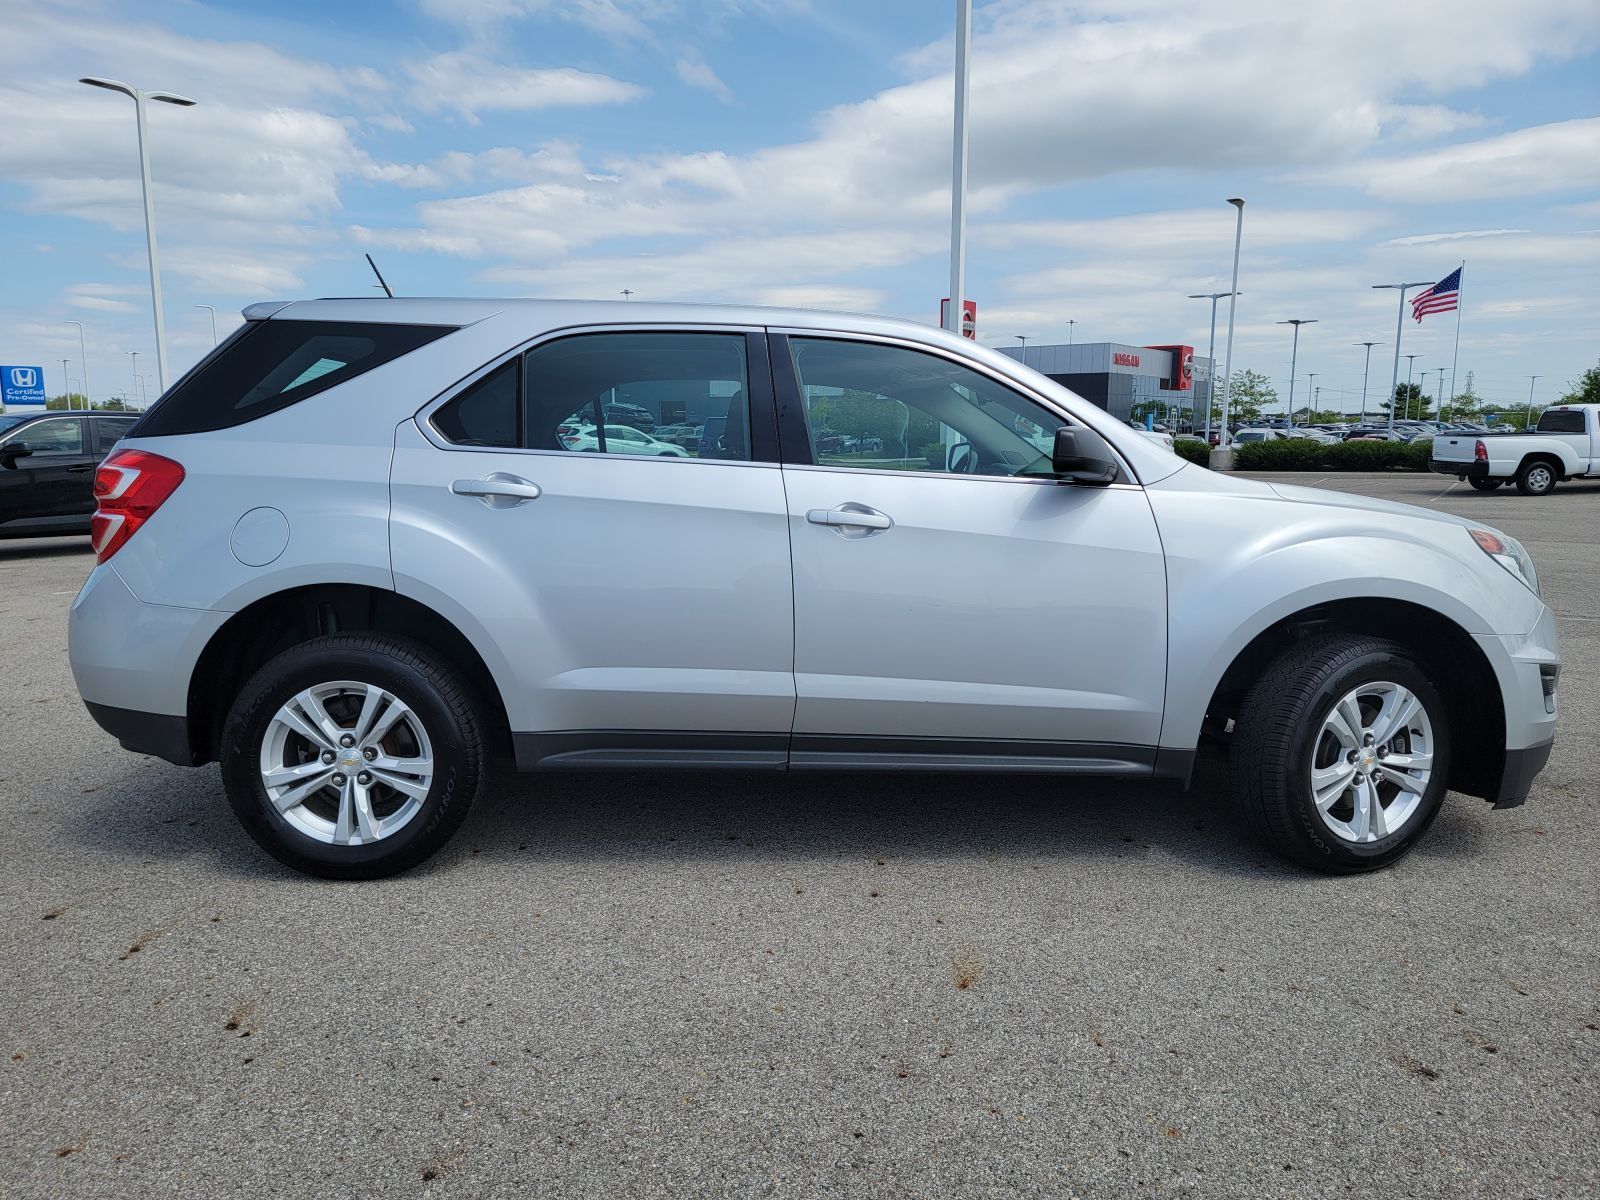 Used, 2017 Chevrolet Equinox FWD 4dr LS, Gray, P0557-9